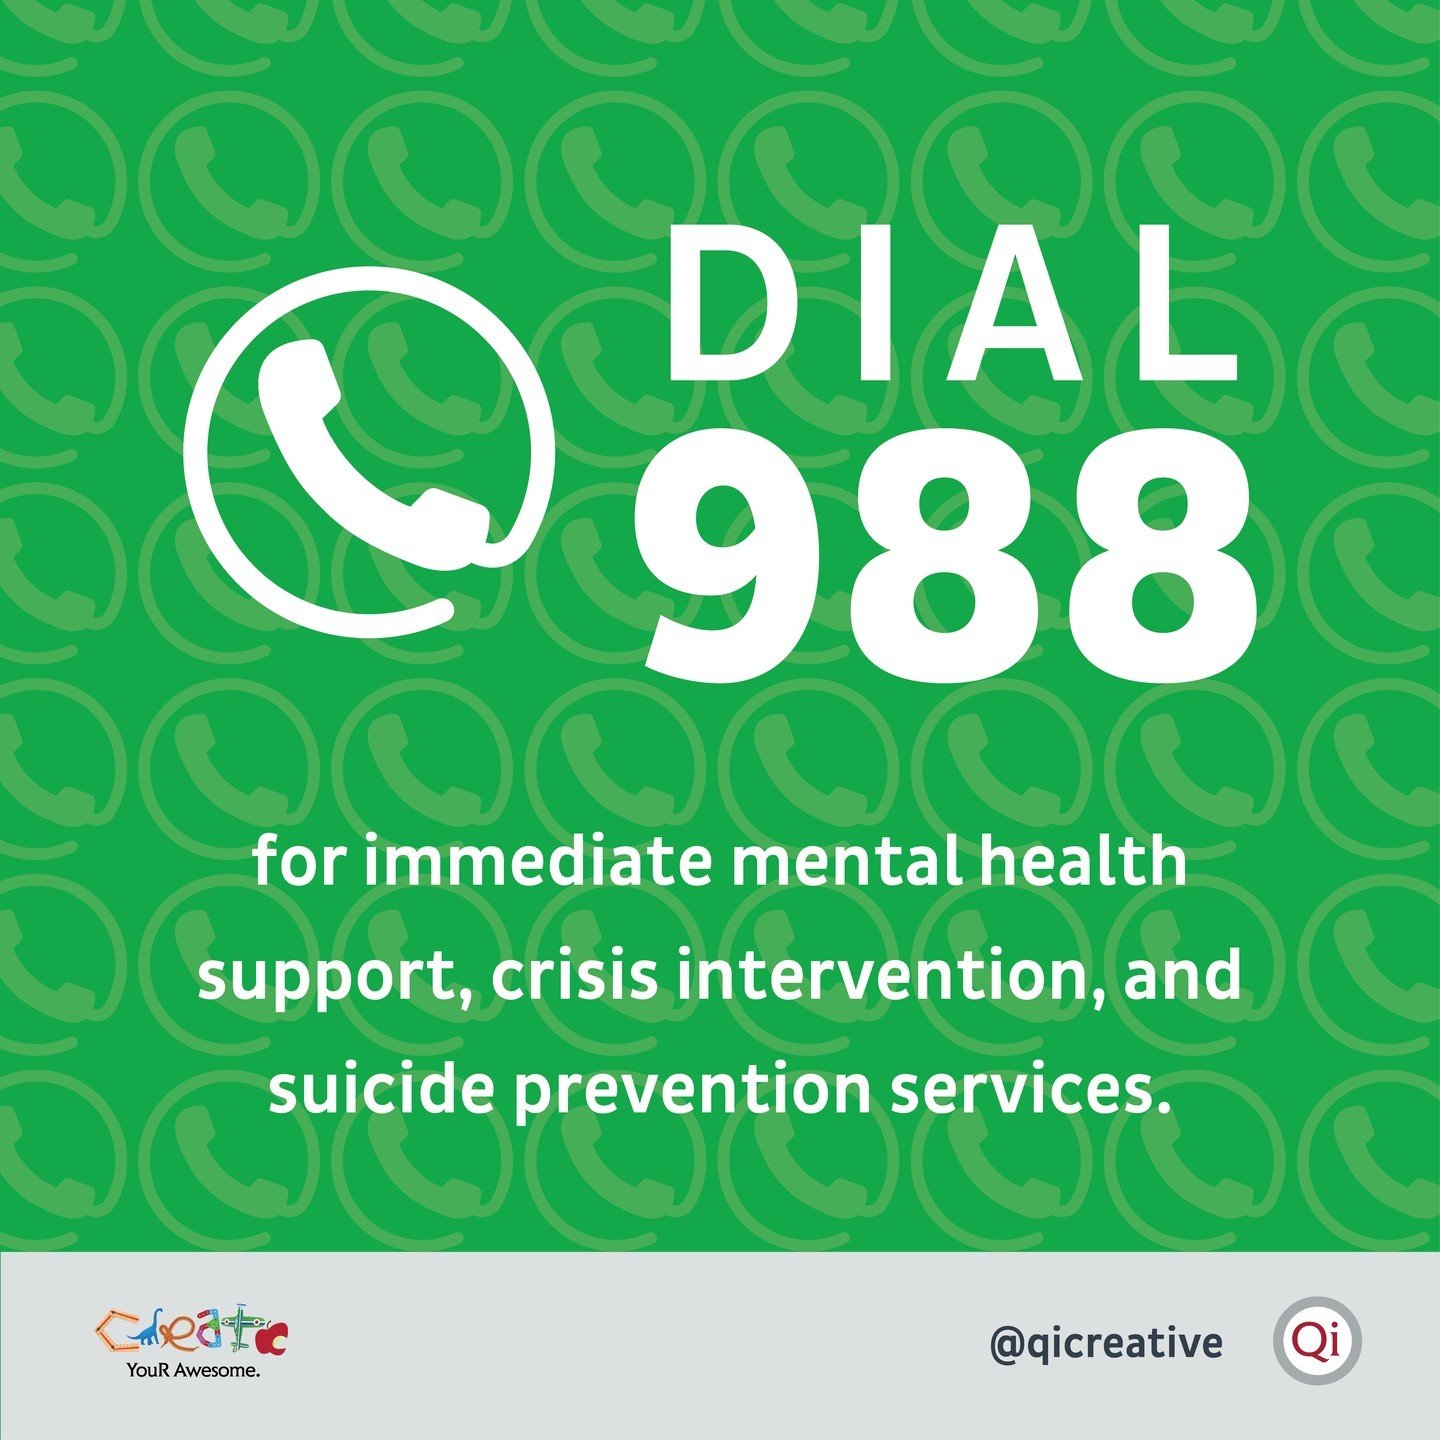 📞 You can dial or text 988 for immediate mental health support, crisis intervention, and suicide prevention services. Help is just three digits away! Spread the word about 988.ca and save a life. 💜 This week is also Mental Health Week (May 6-12, 20